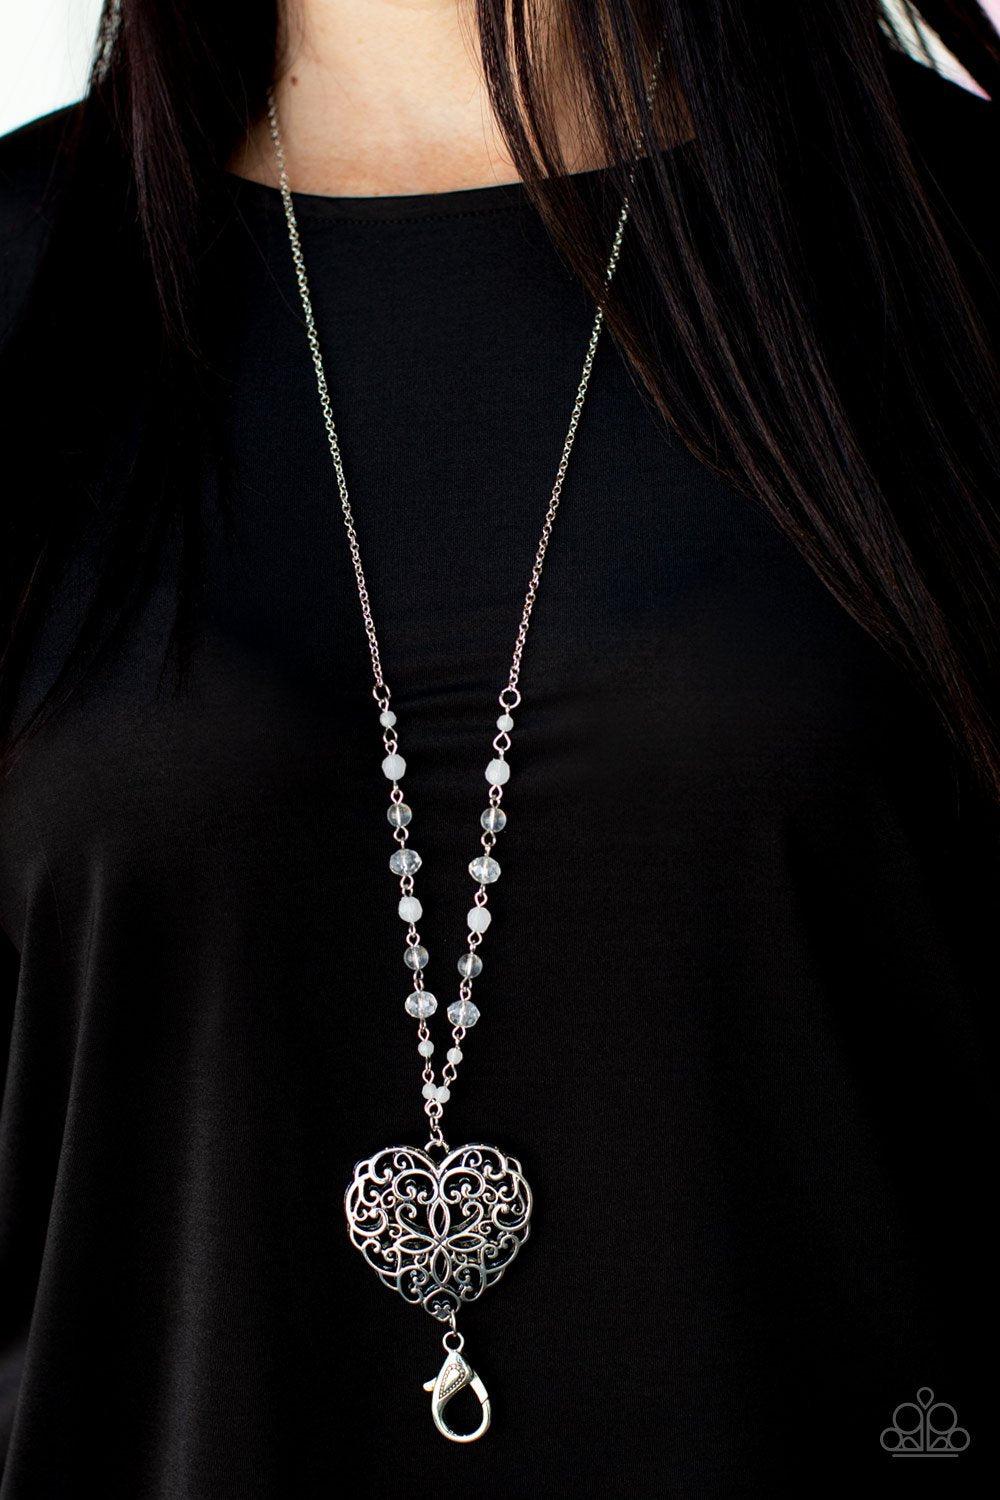 Doting Devotion White and Silver Filigree Heart Lanyard Necklace - Paparazzi Accessories 2021 Convention Exclusive- lightbox - CarasShop.com - $5 Jewelry by Cara Jewels